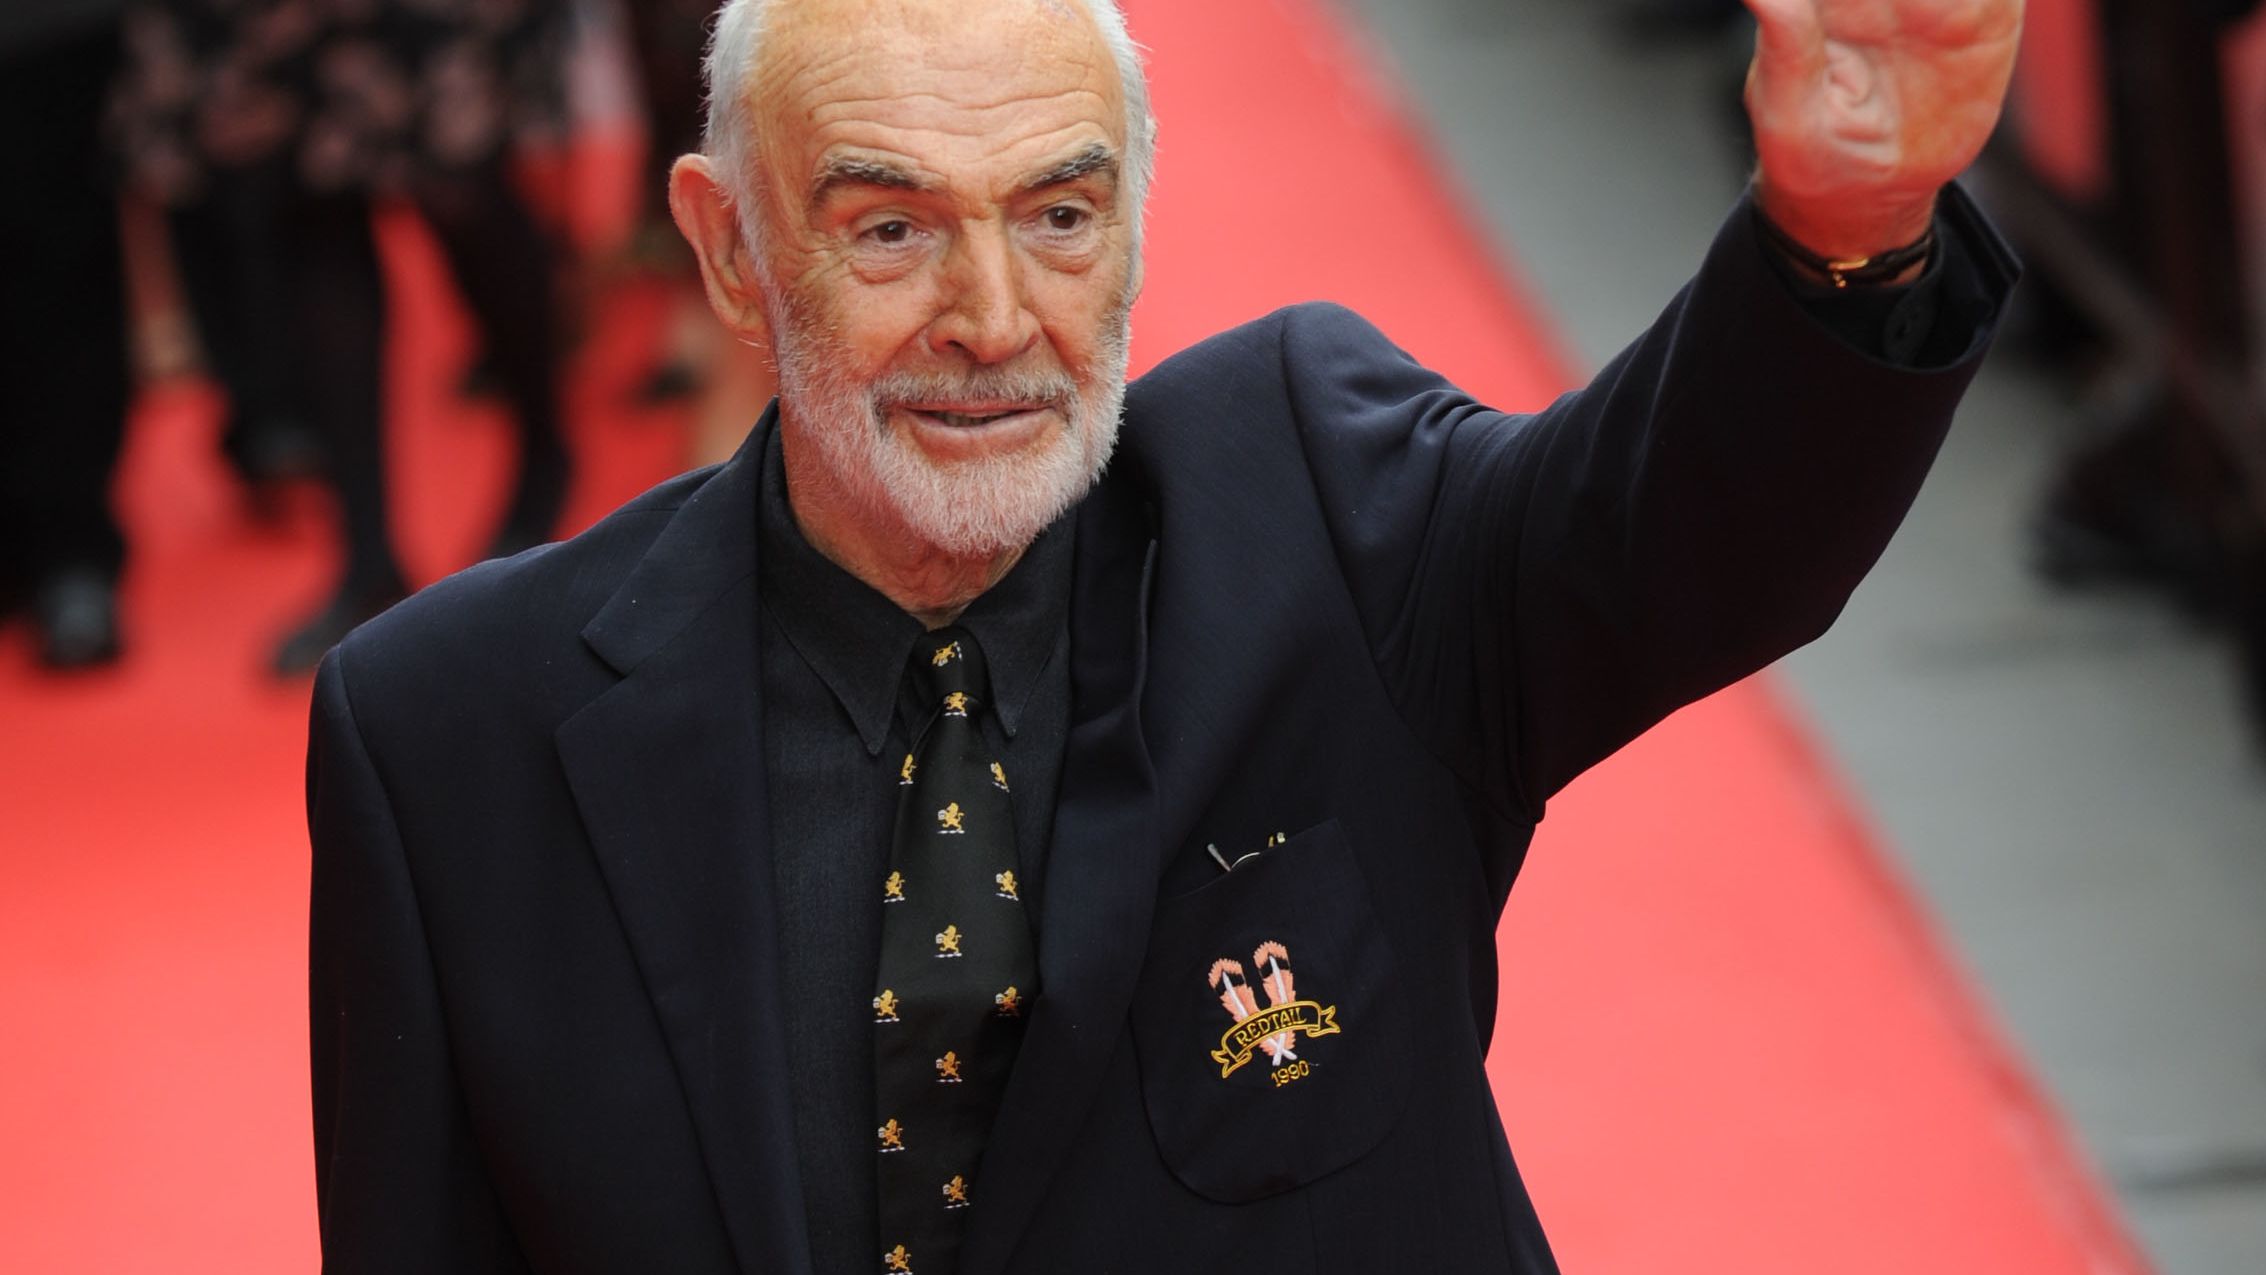 EDINBURGH, UNITED KINGDOM - JUNE 16: Sir Sean Connery attends the opening film of The Edinburgh Film Festival: The Illusionist on June 16, 2010 in Edinburgh, Scotland. (Photo by Ian Jacobs/Getty Images)